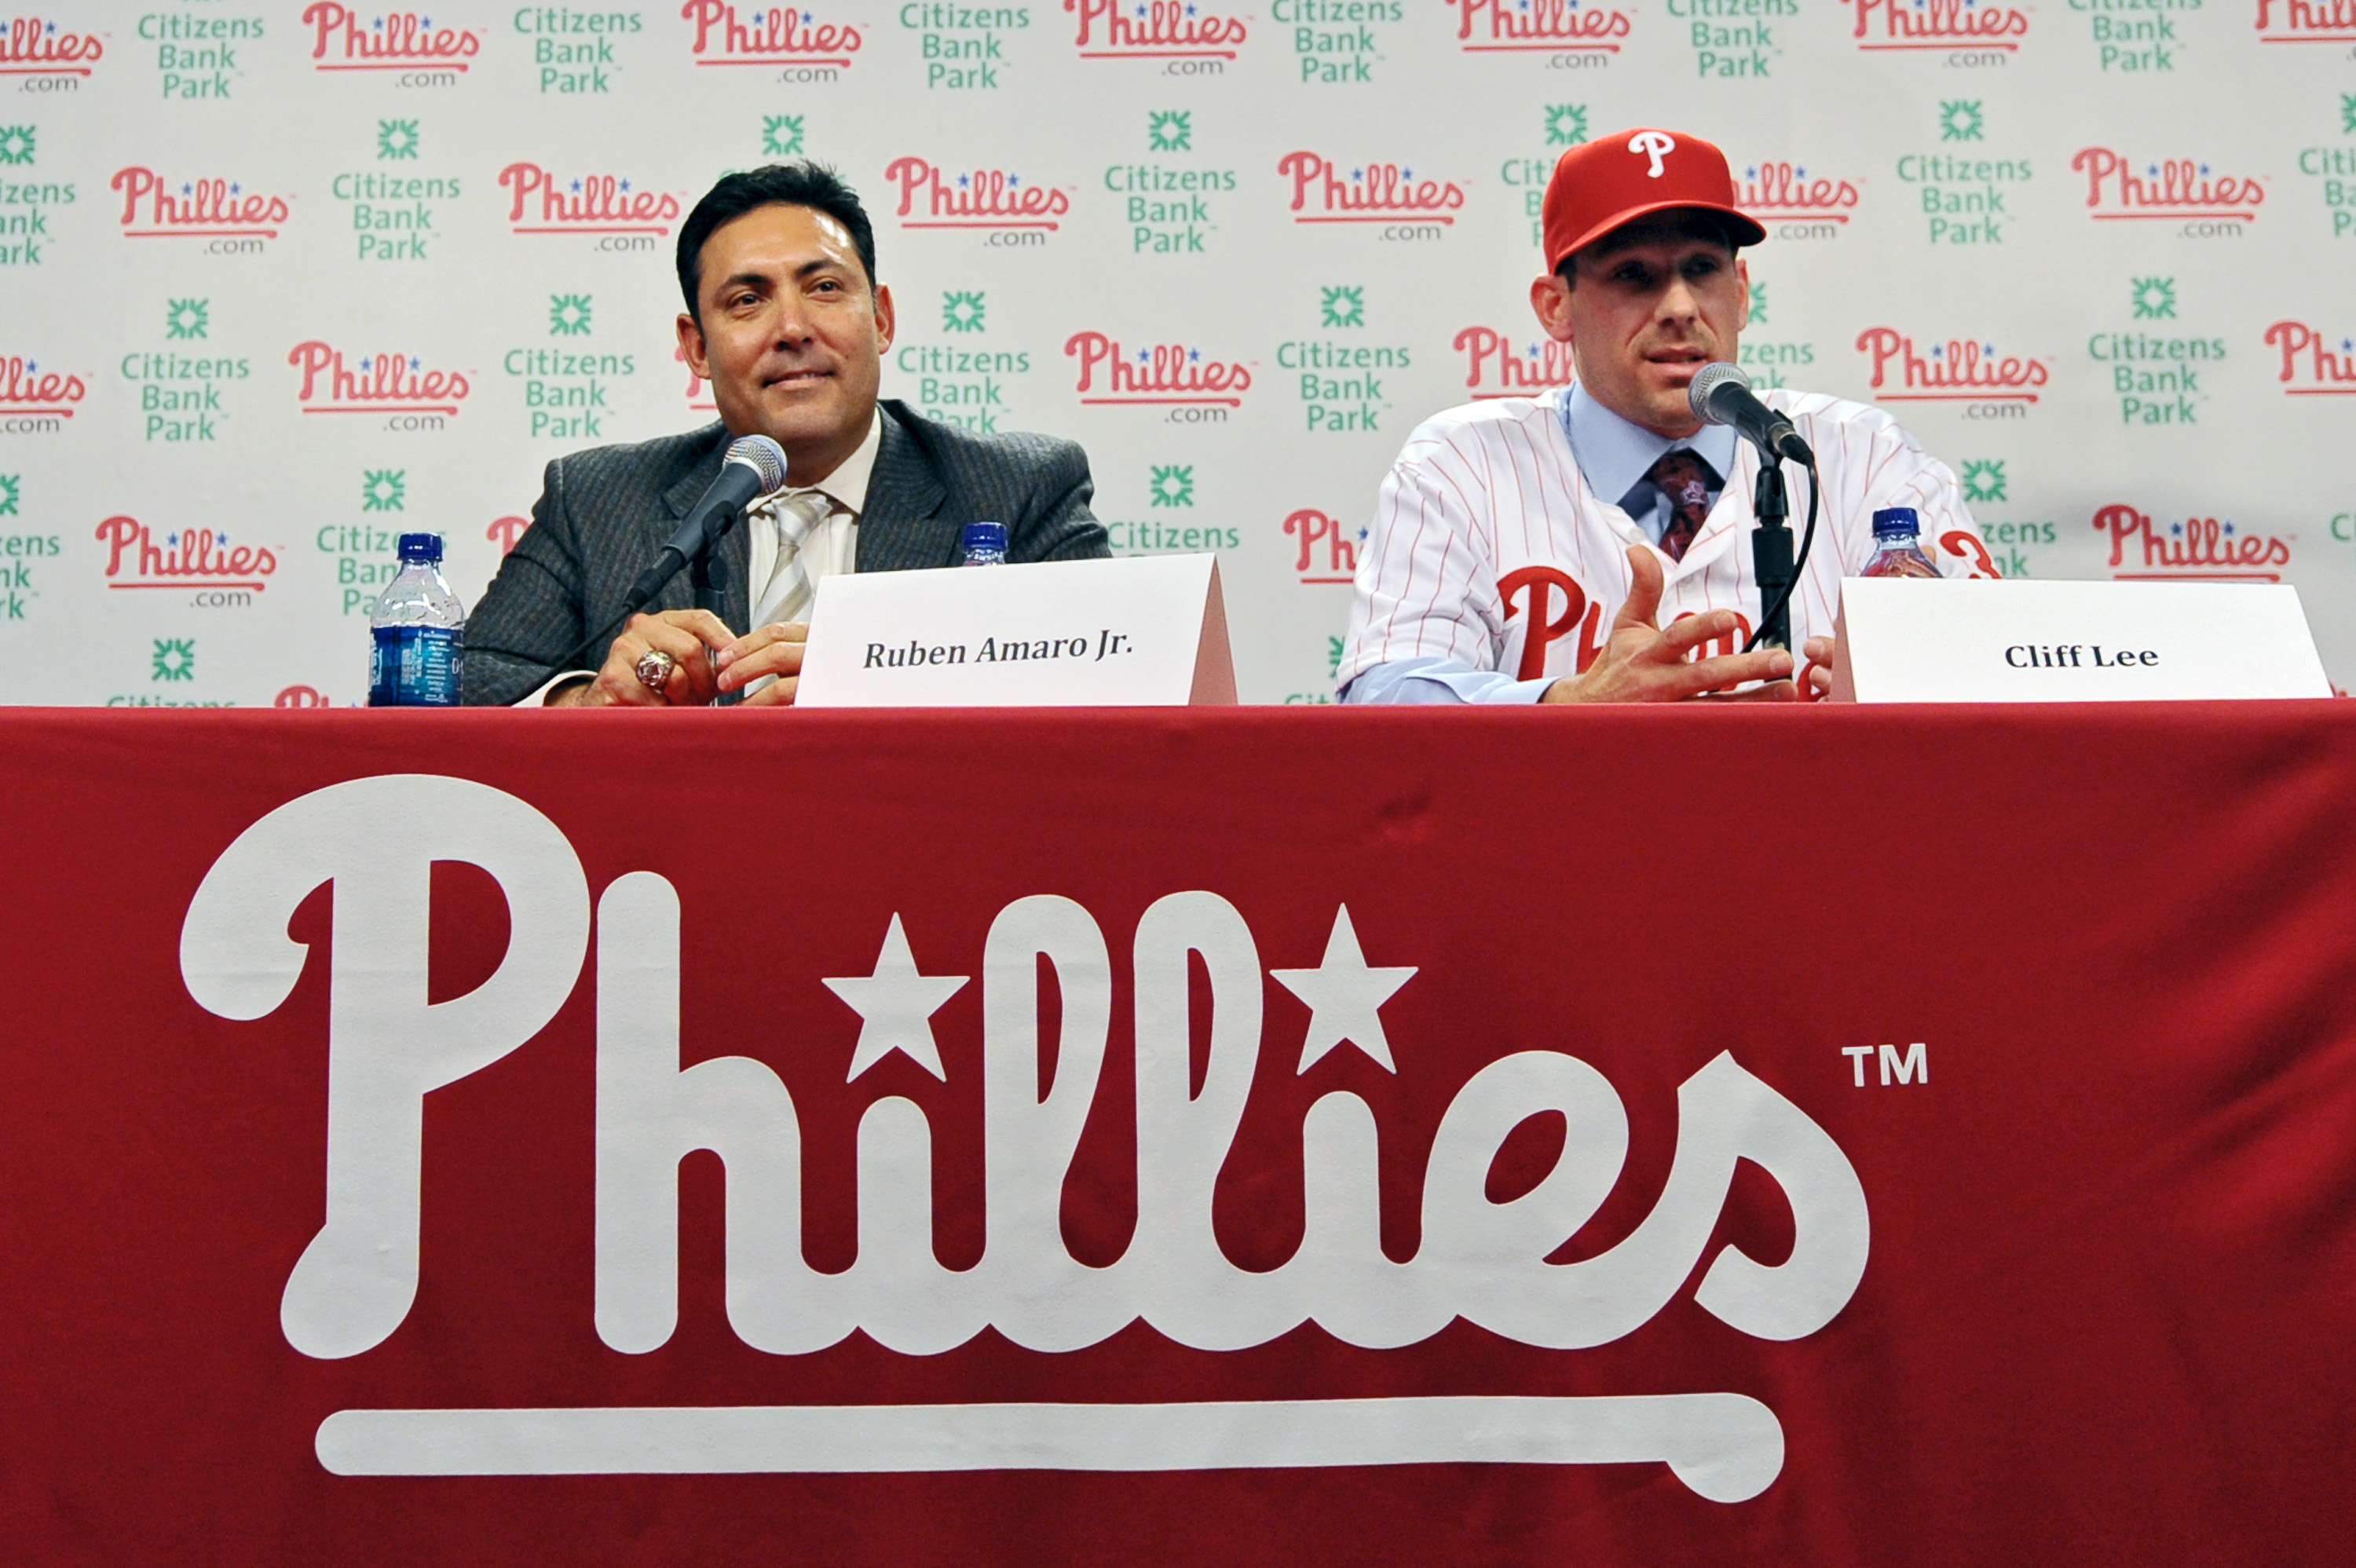 Where's Cliff?” 2009 Phillies reunite at Citizens Bank Park, but Cliff Lee  is missing